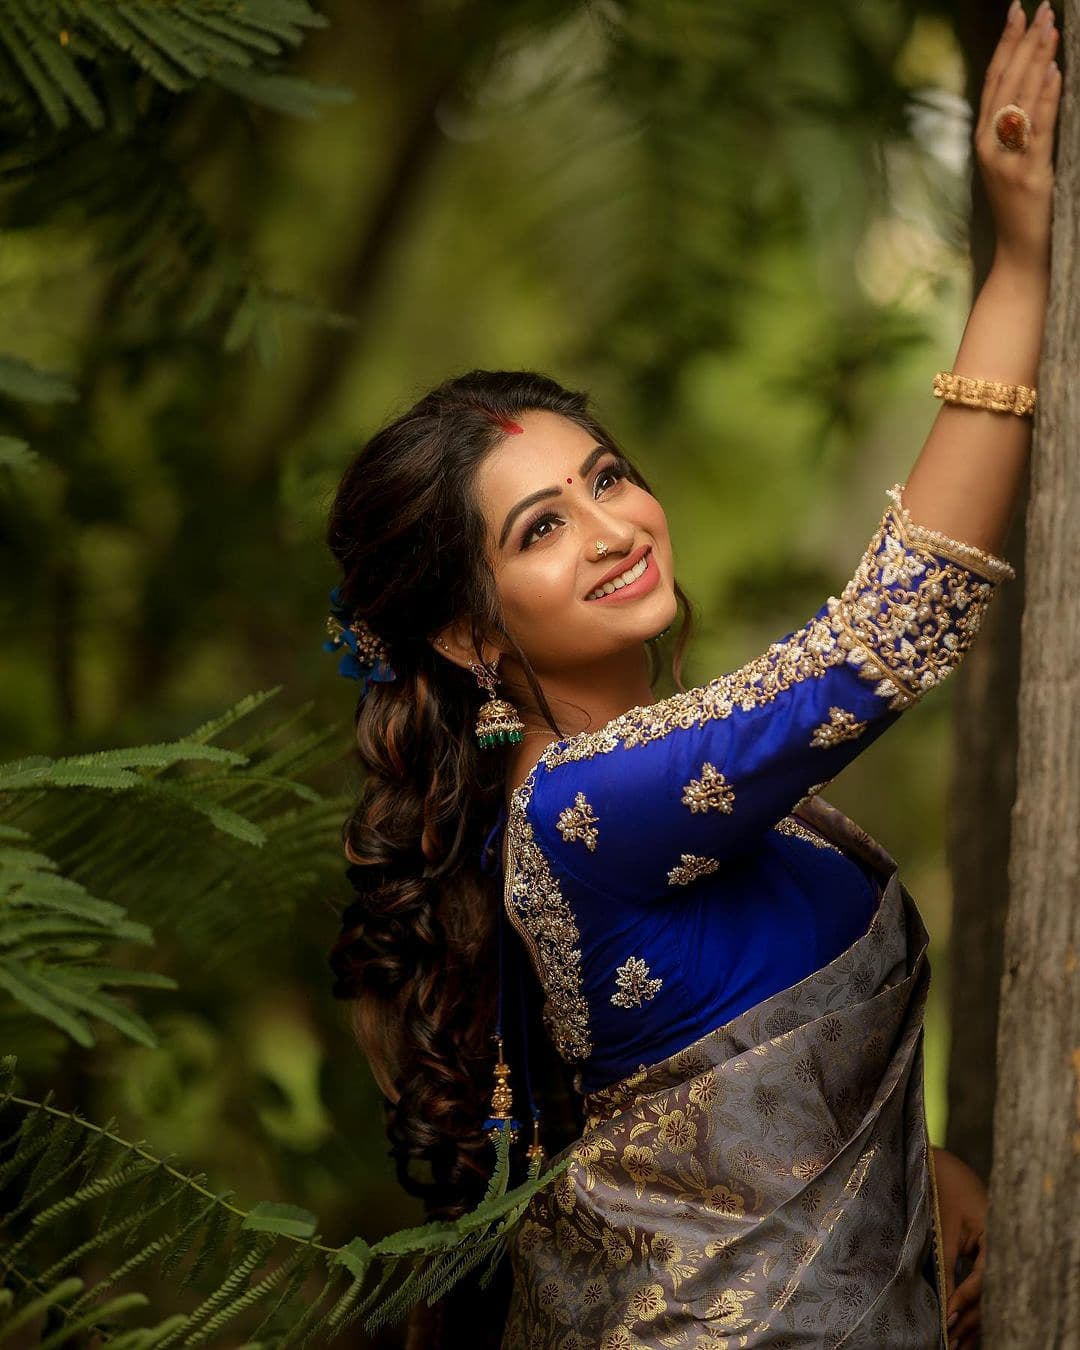 Traditional-Saree-Poses- THE EMERGING INDIA